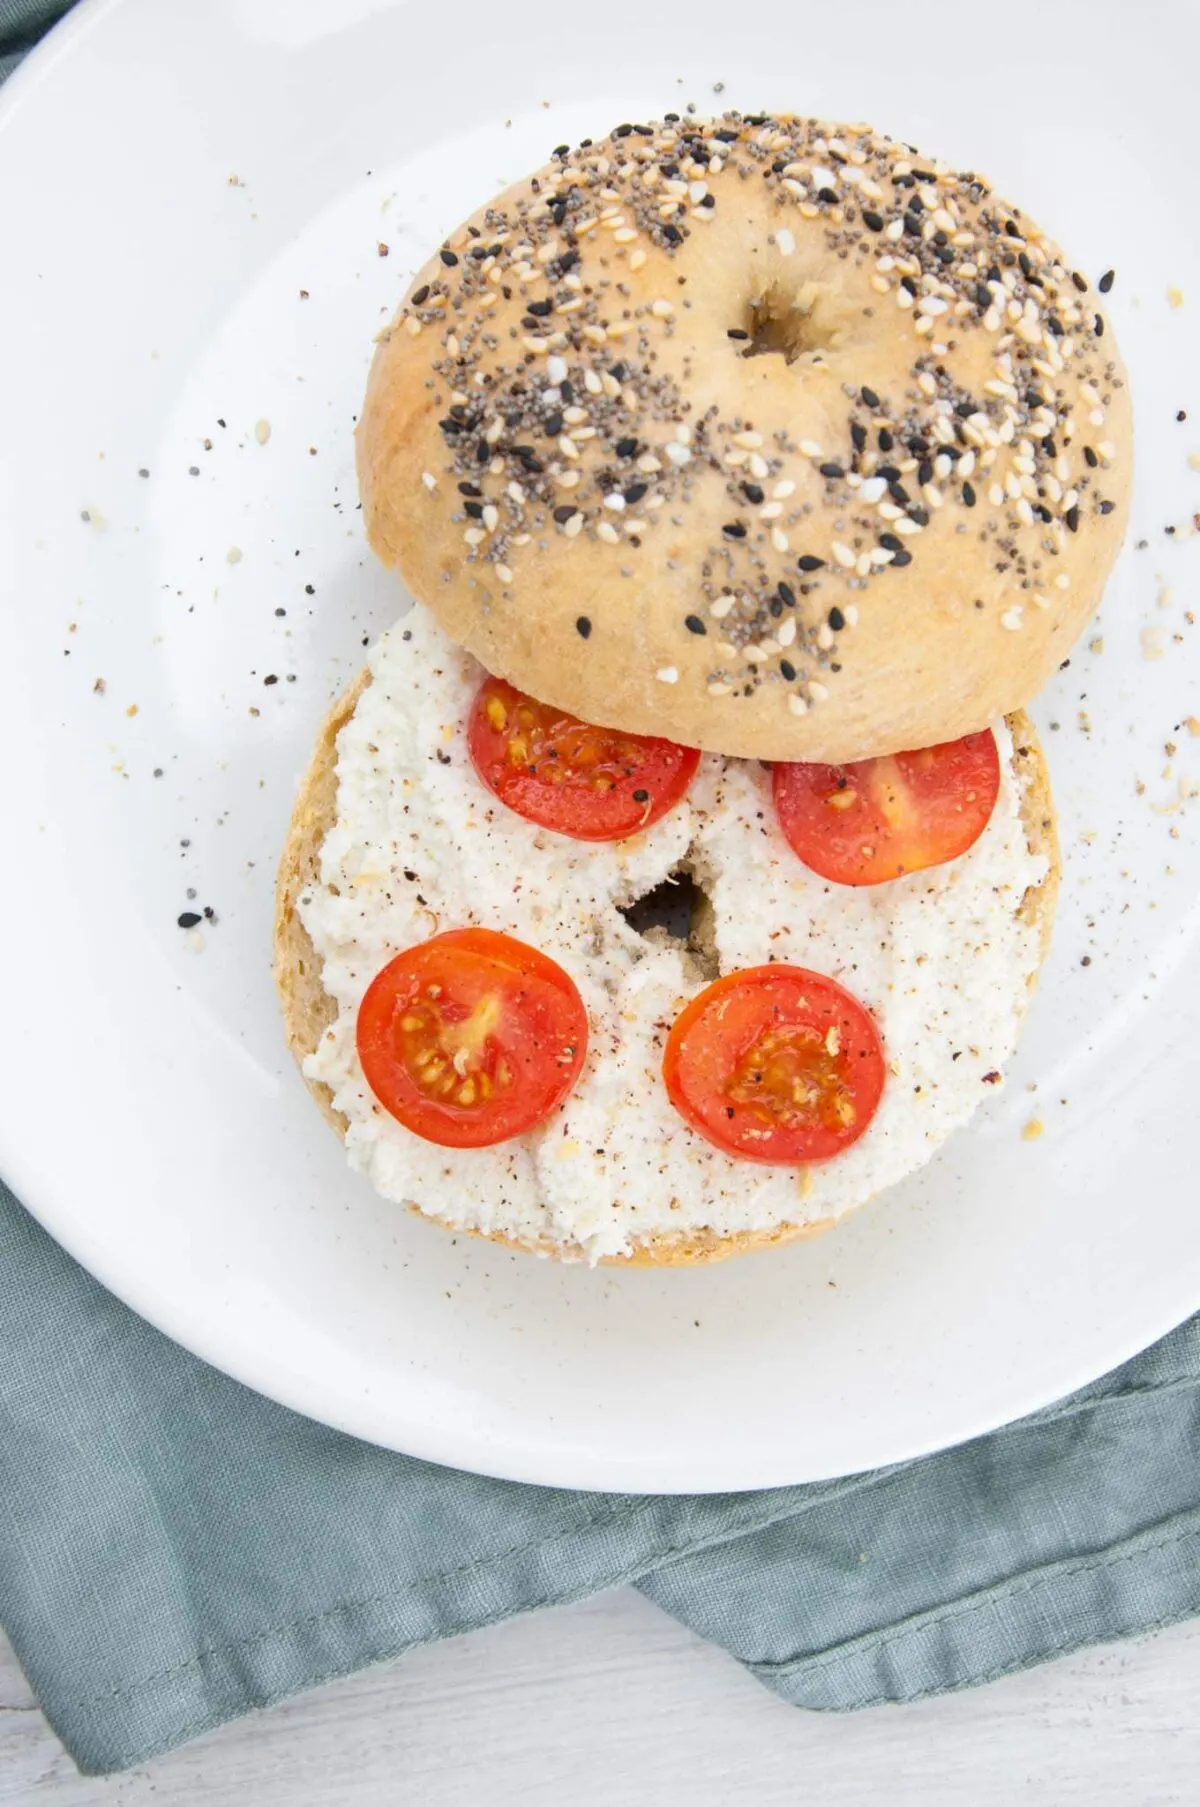 Almond Cream Cheese on a bagel with cherry tomatoes and cracked pepper